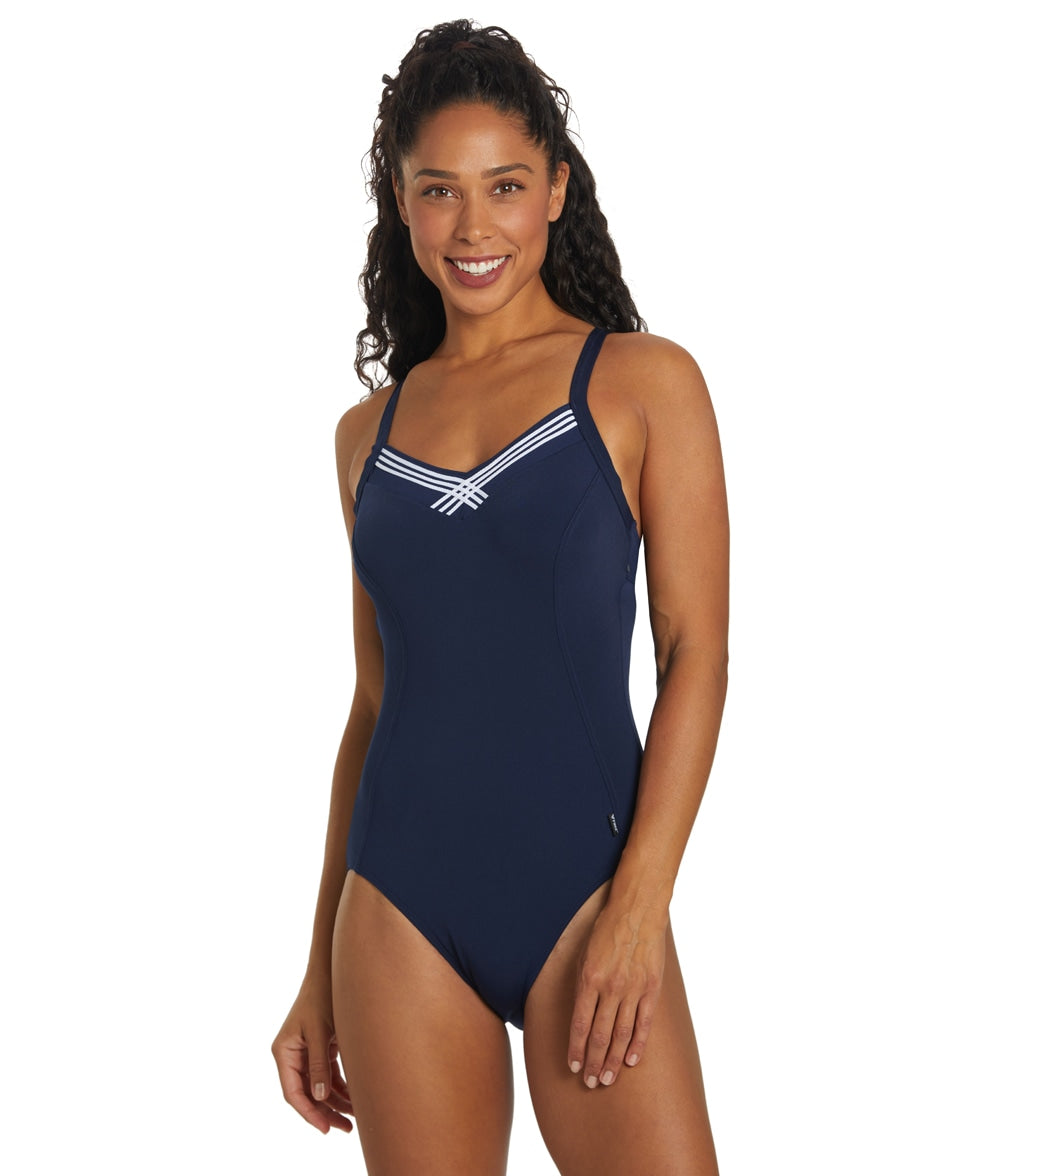 FINZ Womens Crossed Taped One Piece Swimsuit